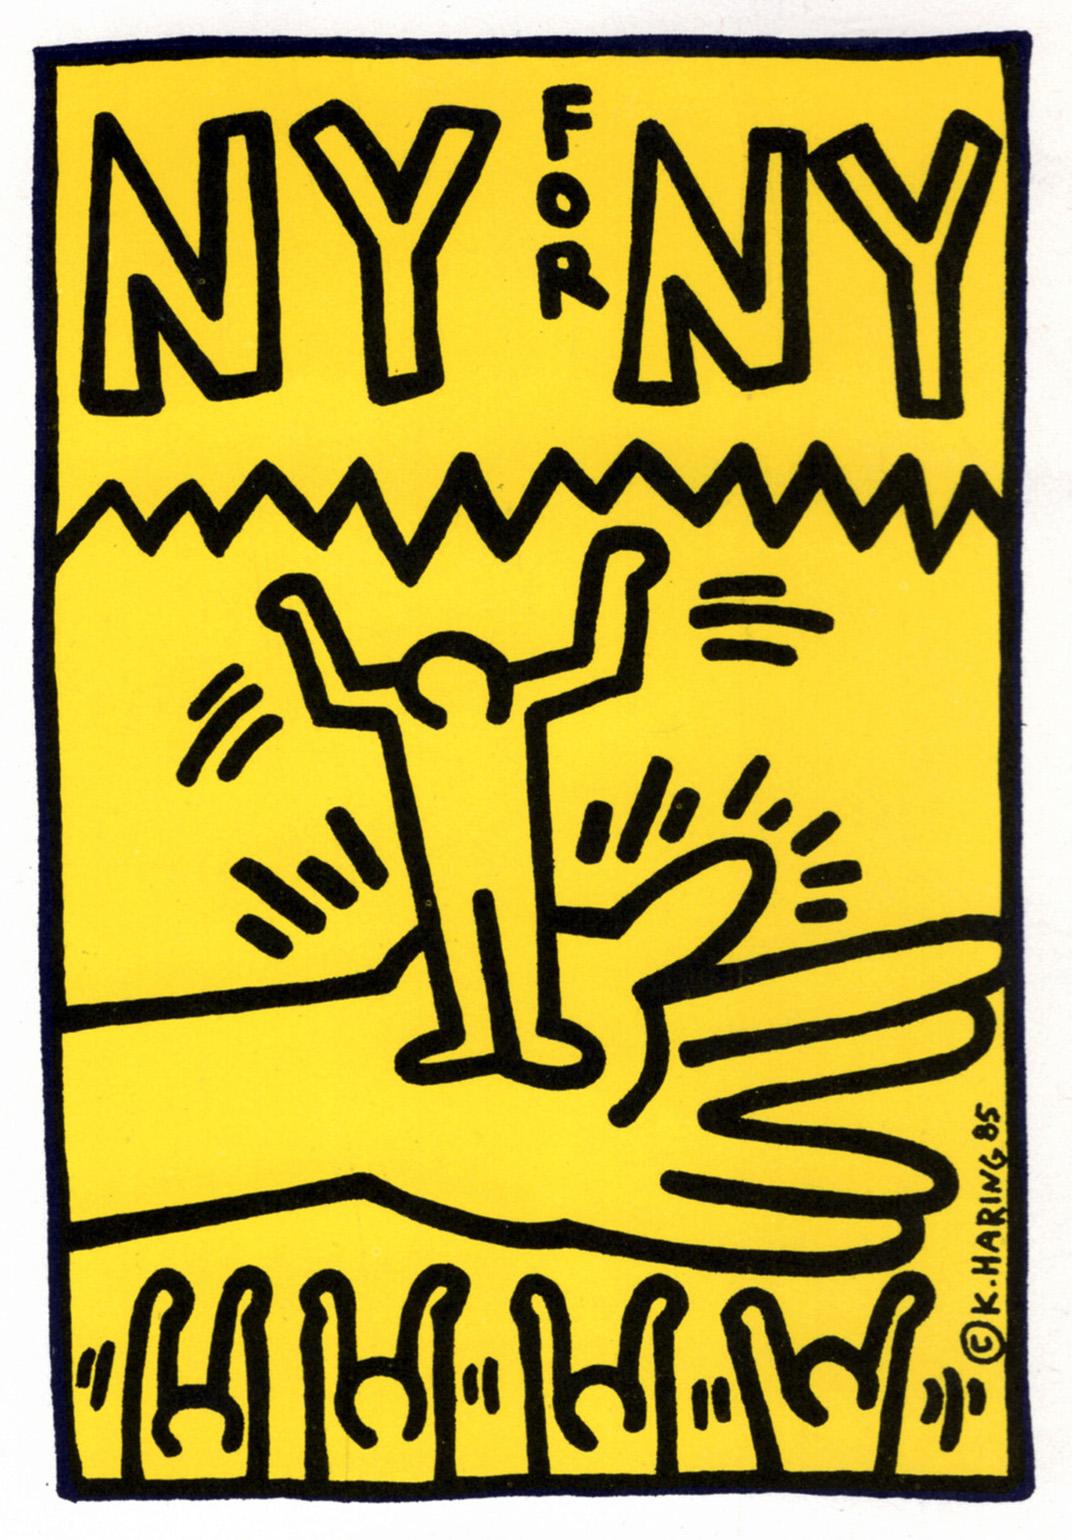 Keith Haring 1985:
Keith Haring off-set illustrated announcement card, NY, 1985: "NY for NY, Help The Homeless" at The Roxy, West 18th St., NYC.

Off-set printed, 1985 (folds open into three sections).
Measures: 5 x 7 inches (15 x 7 inches when